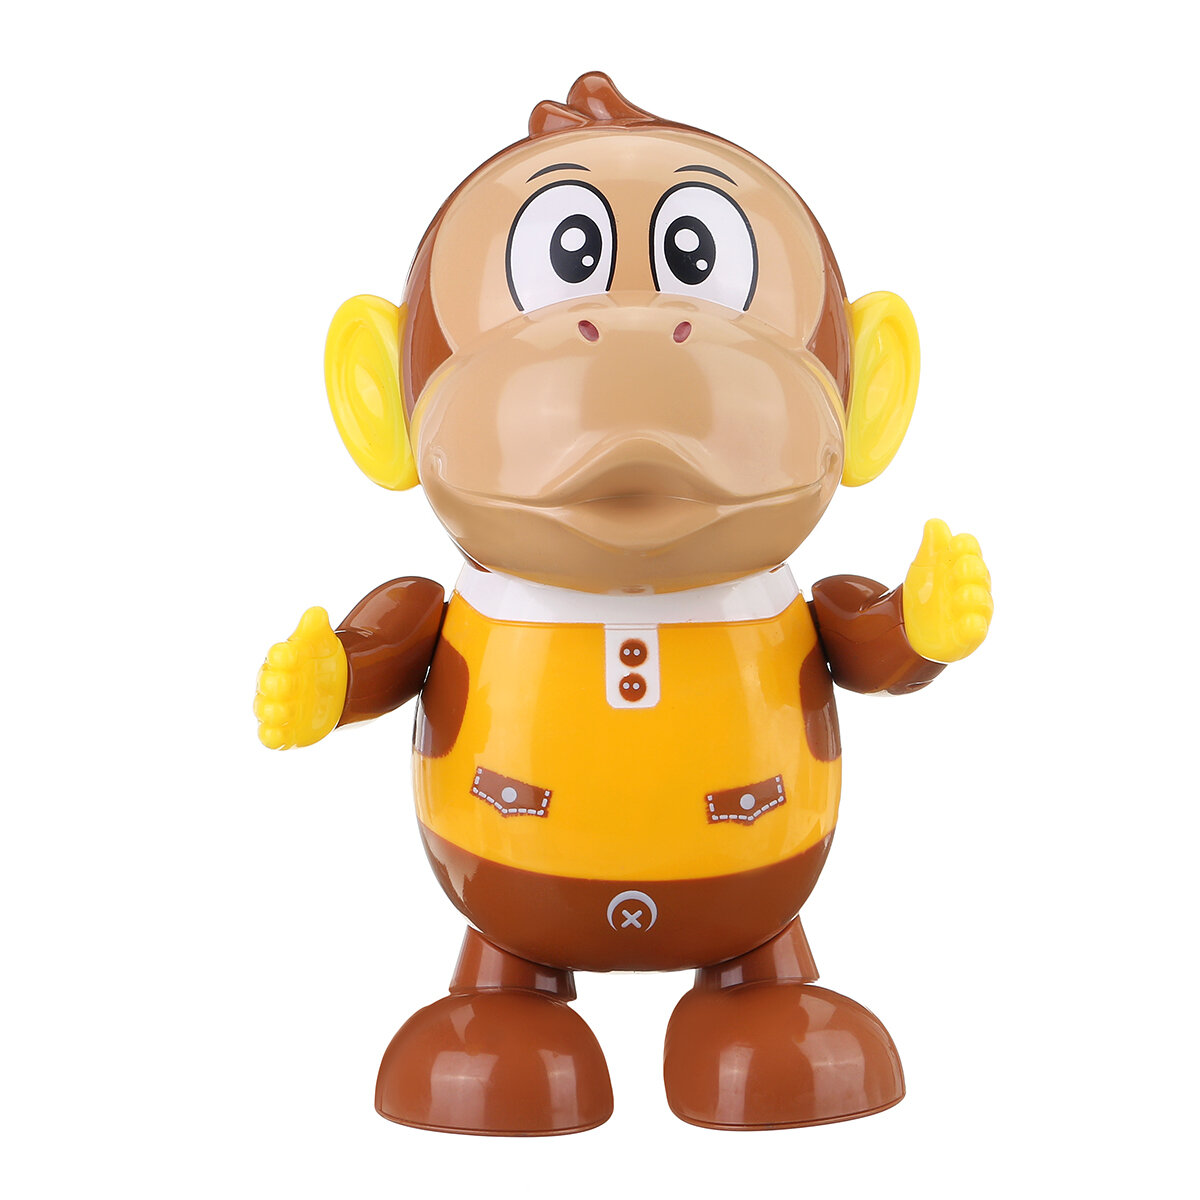 Dancing Monkey Music Walking Funny Swing Animal Doll Electric Robot Toy for Kids Gift